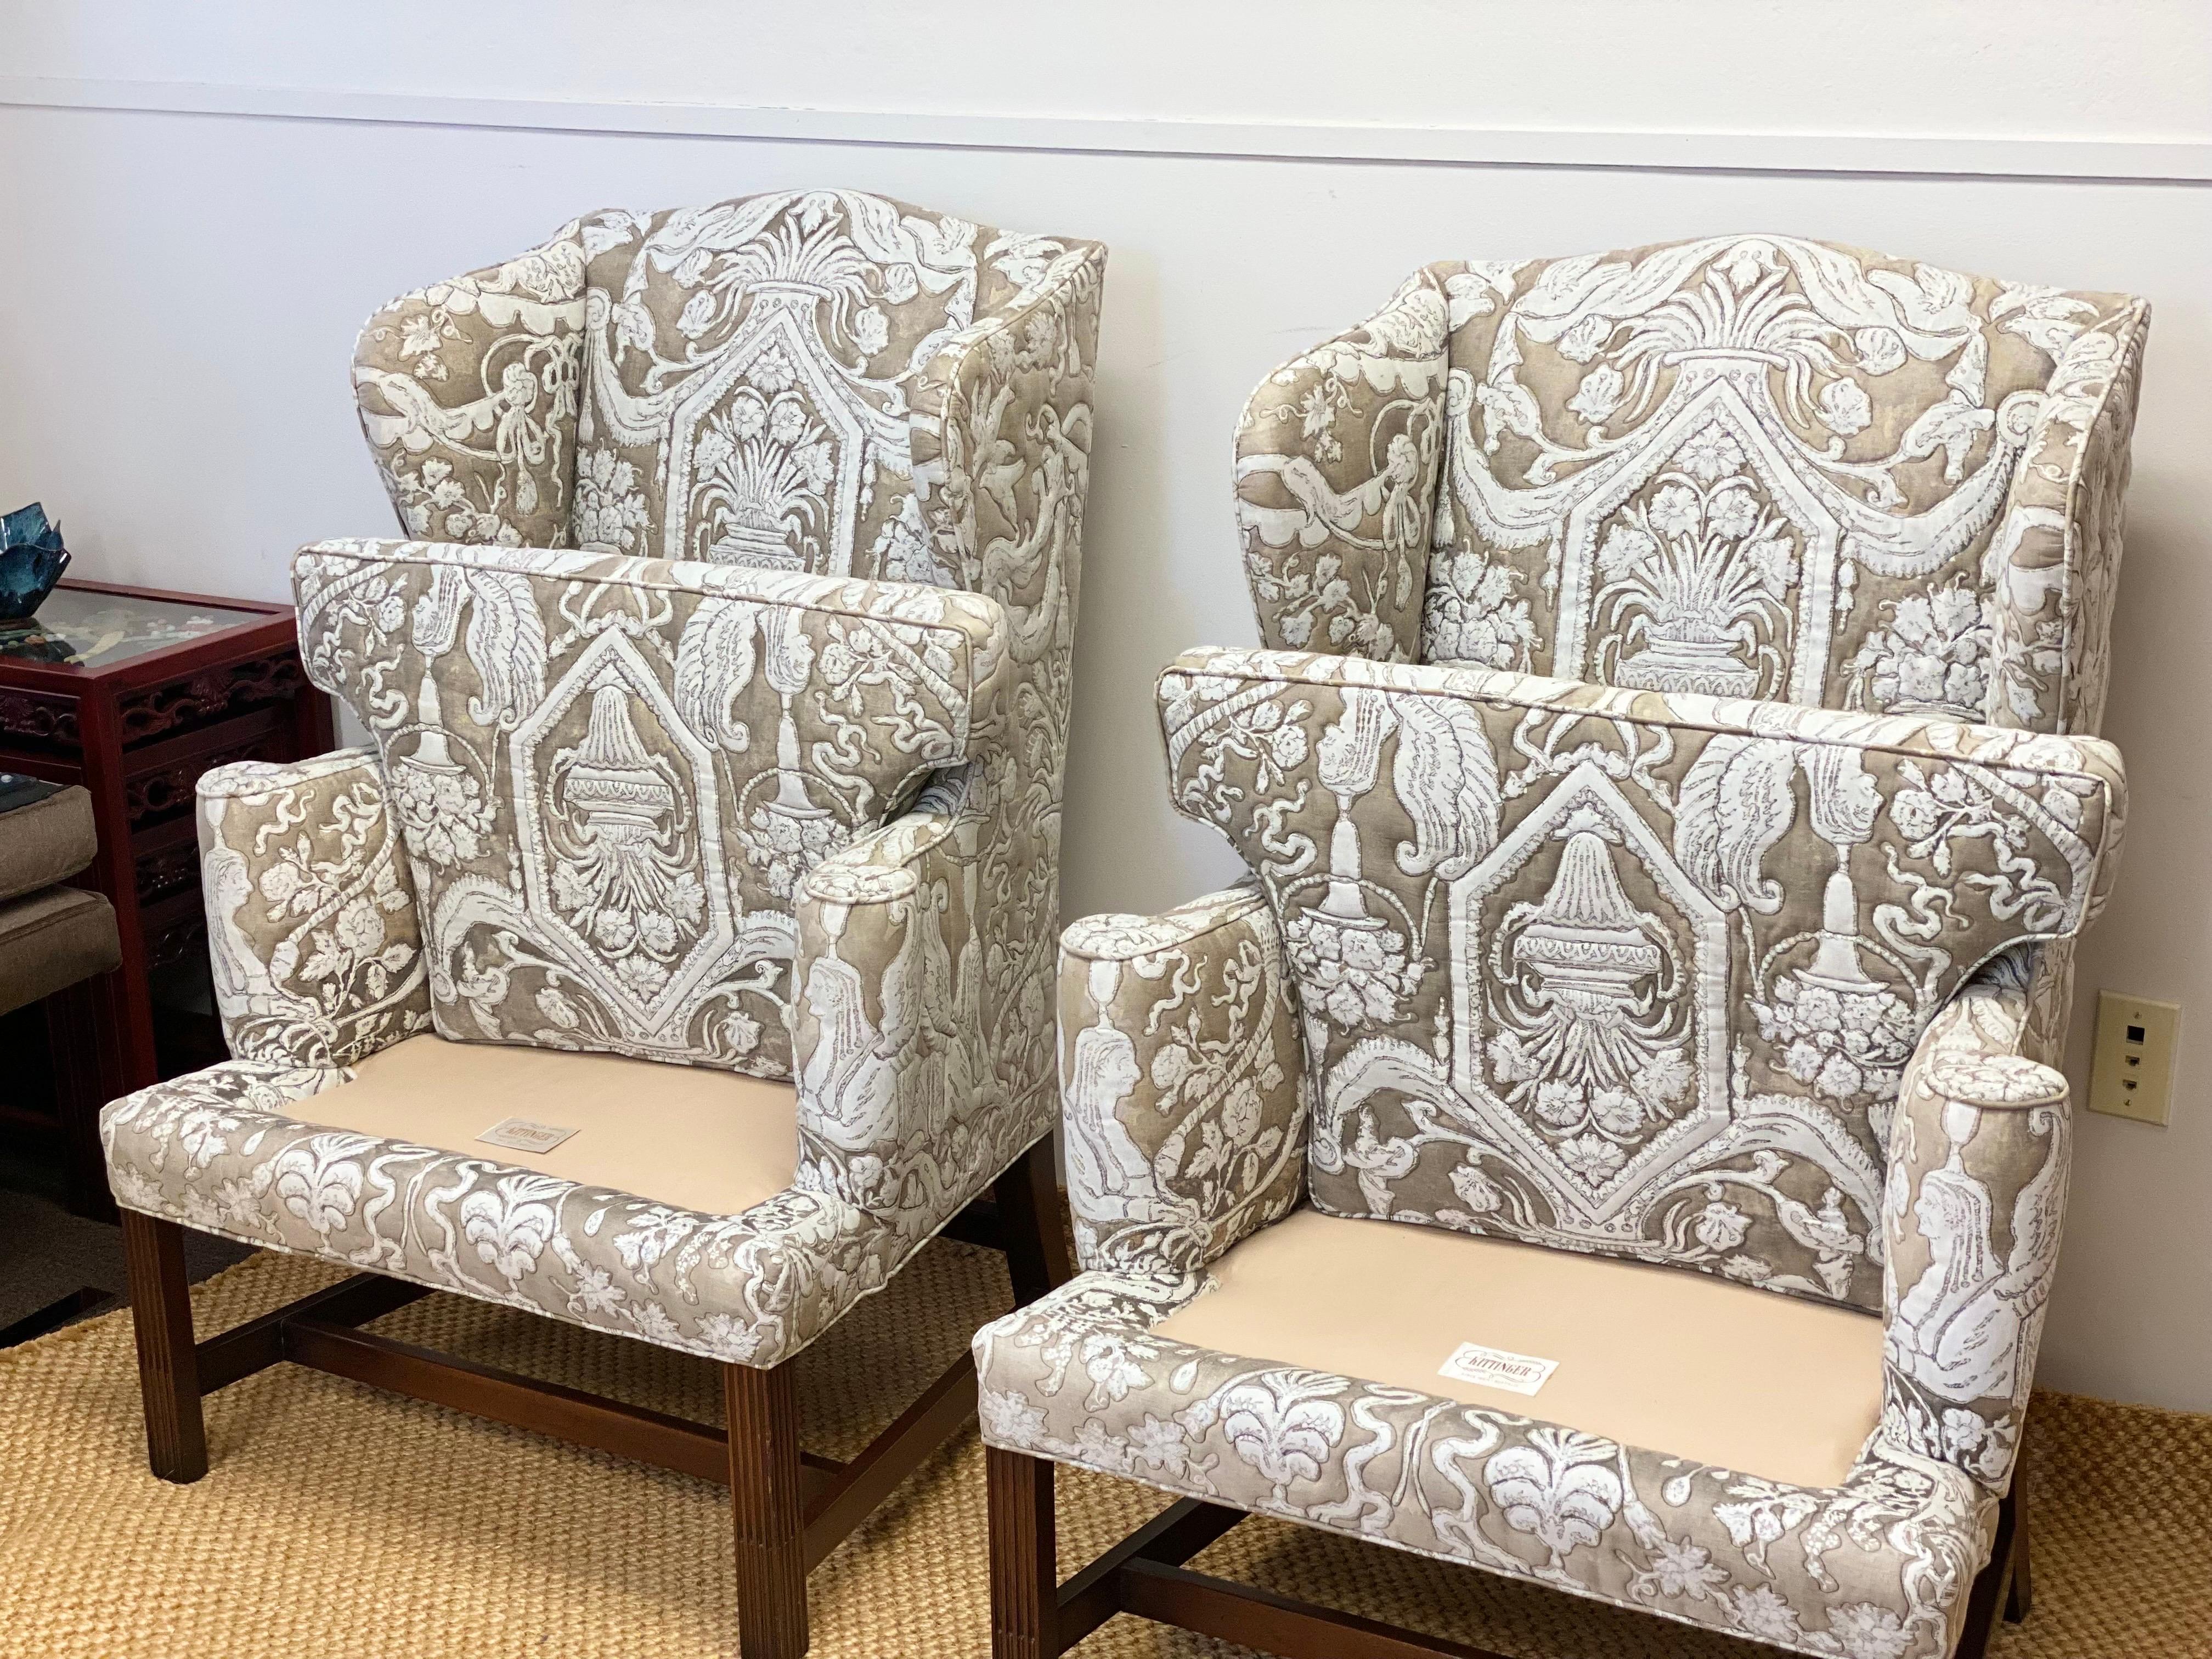 Kittinger Coloni Colonial Williamsburg Neoclassical Wingback Chairs 1960s - a Pair en vente 1